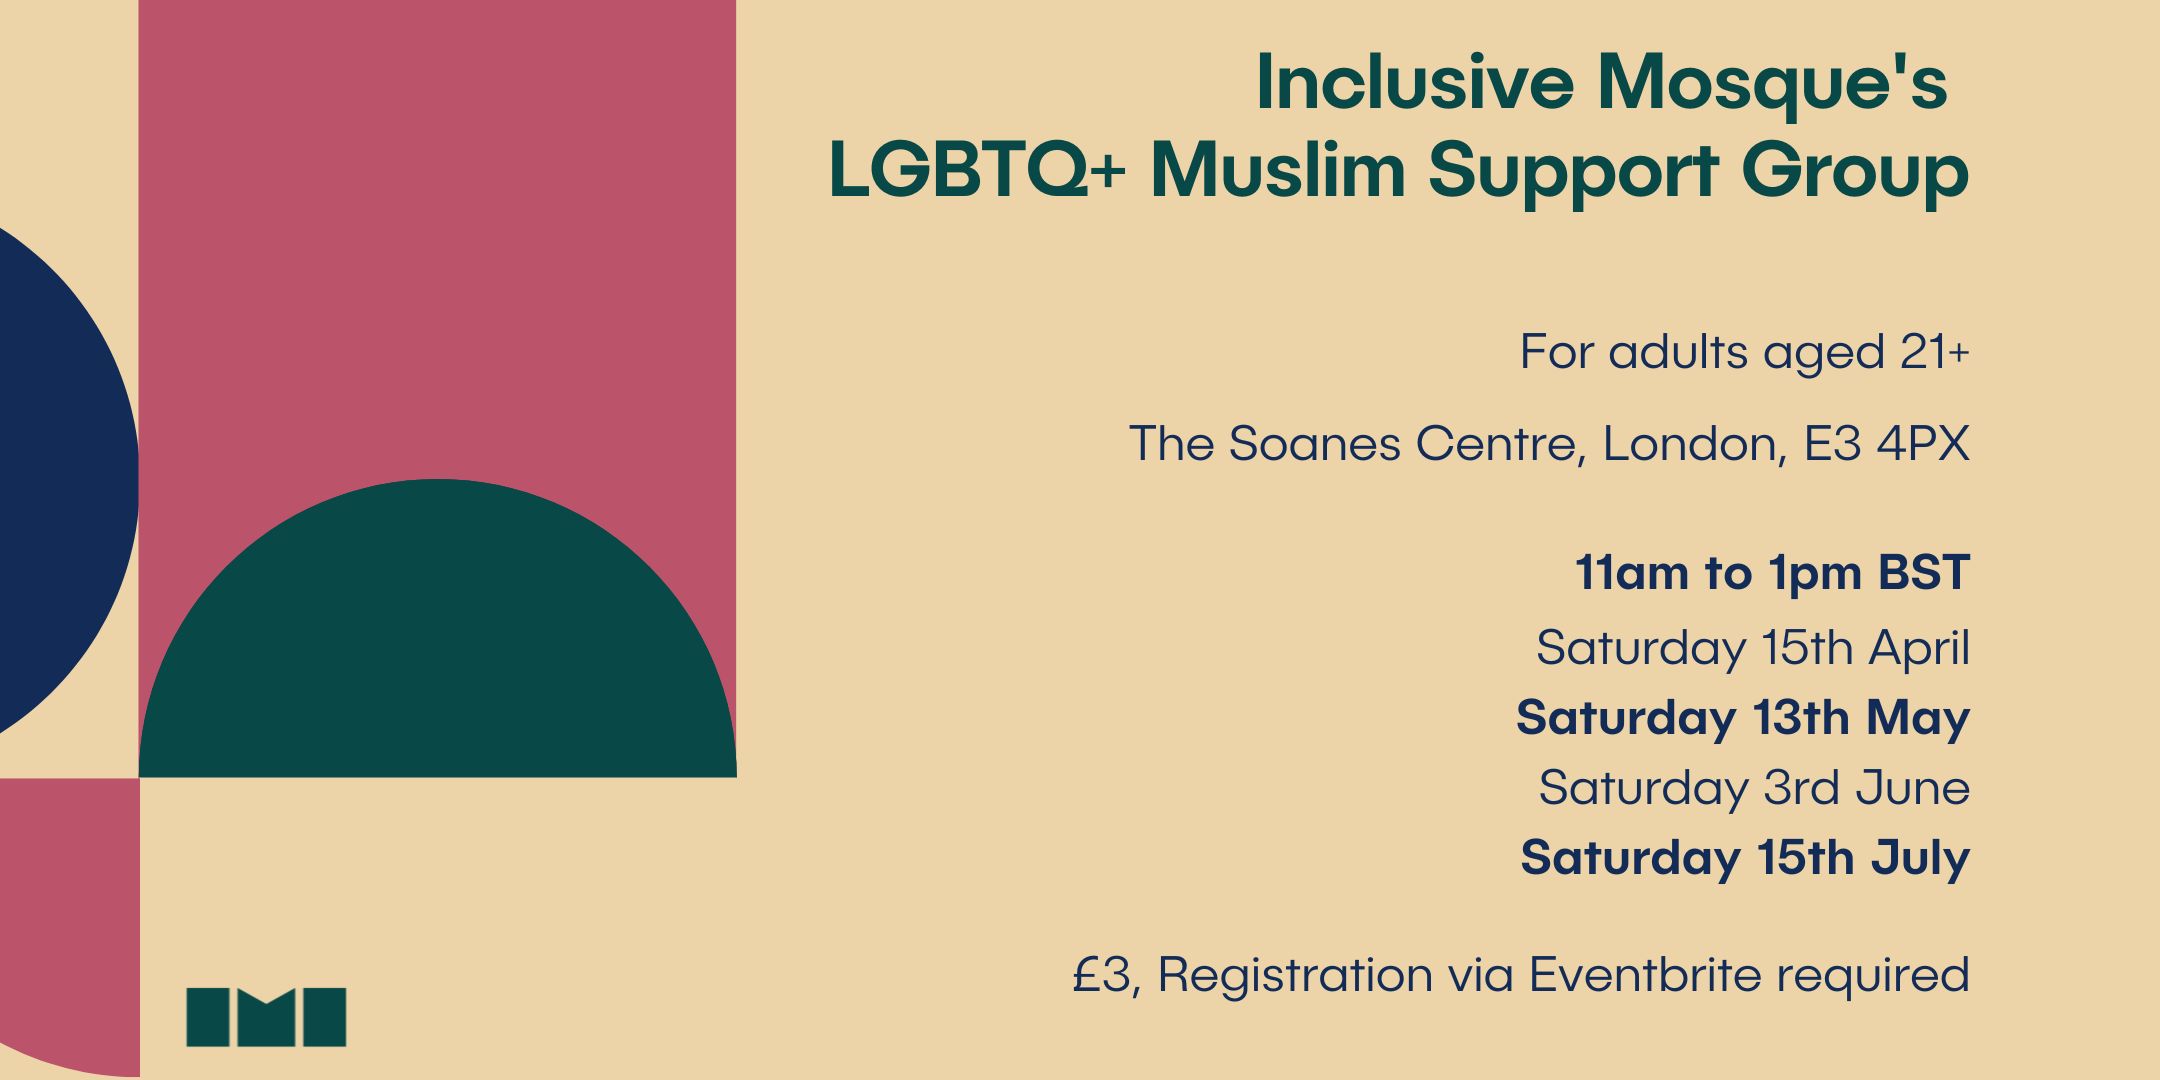 A multicoloured geometric graphic on a green background with text to the right saying, "Inclusive Mosque's LGBTQ+ Muslim support group. For adults aged 21+. The Soanes Centre, London, E3 4PX. 11am to 1pm BST. Saturday 15th April, Saturday 13th May, Saturday 3rd June, Saturday 15th July. £3, Registration via Eventbrite required."